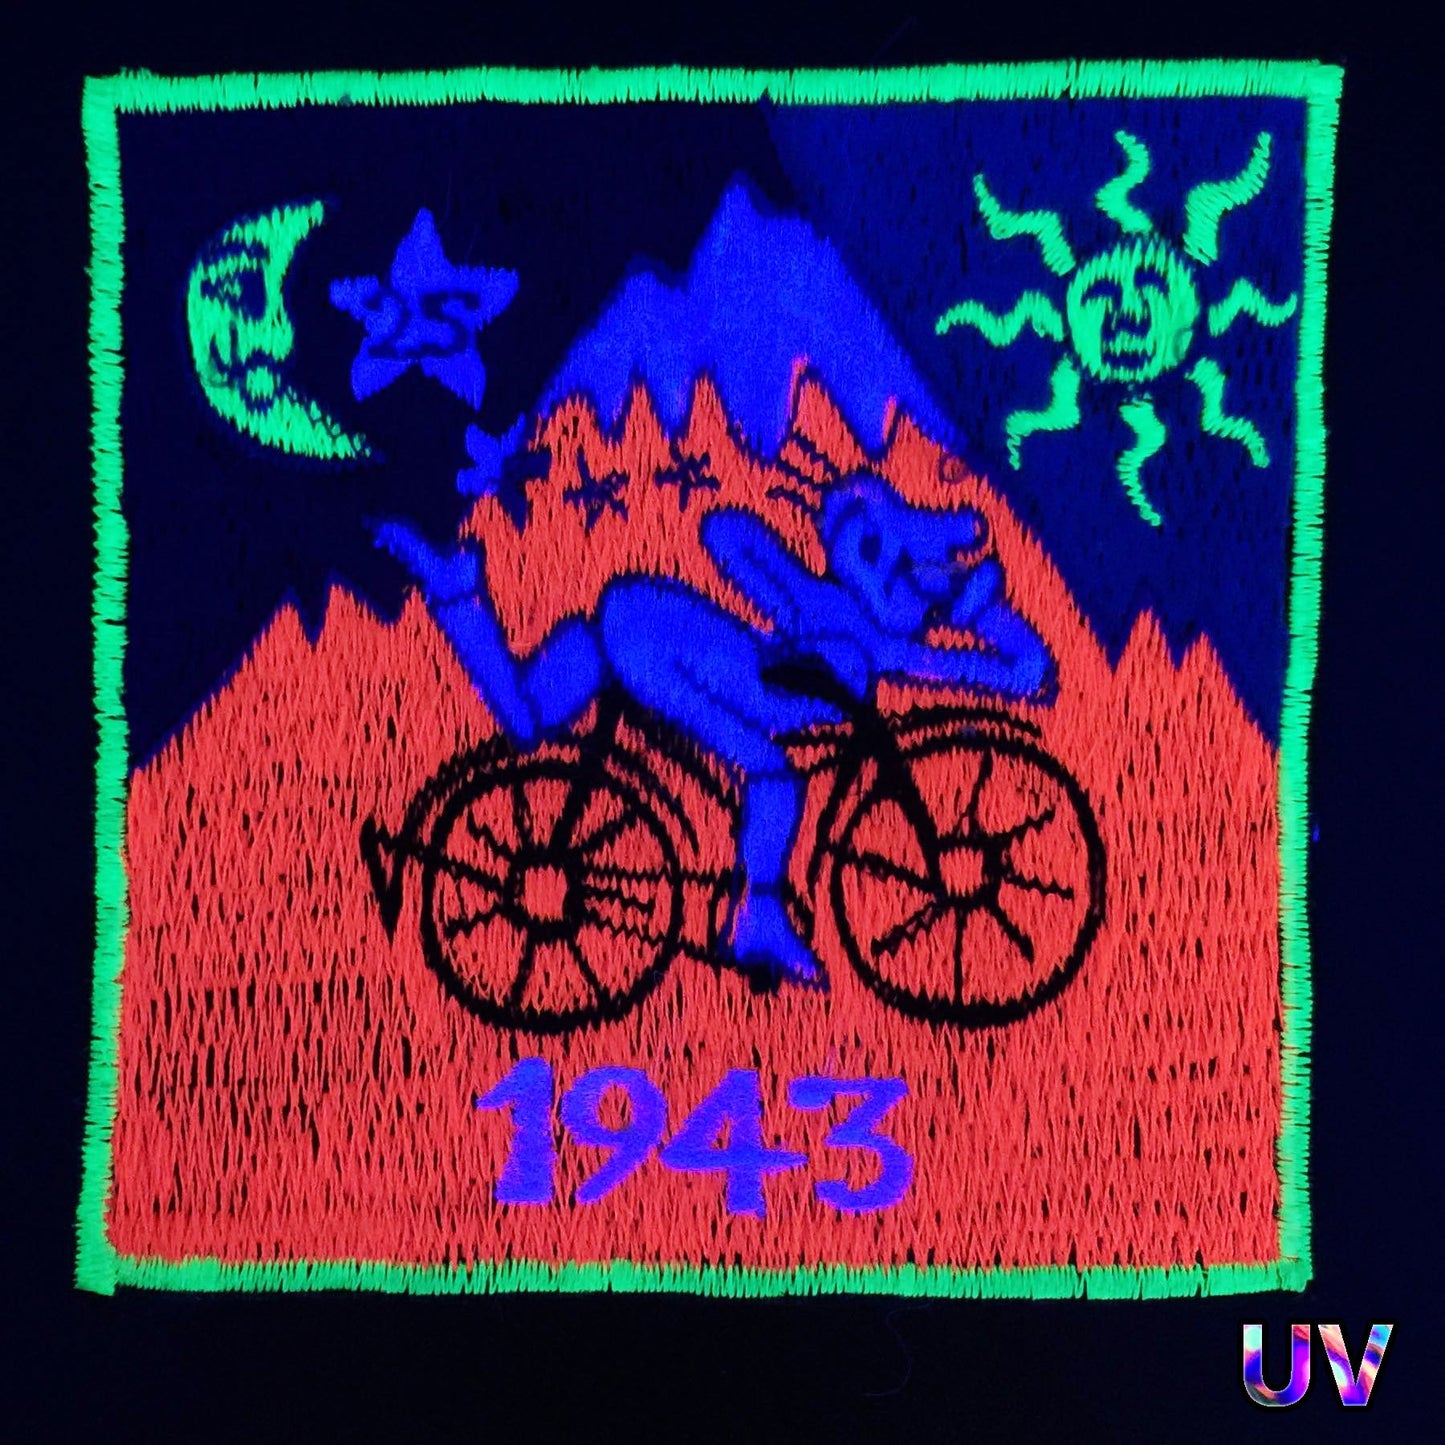 Bicycle Day Patch UV pink Albert Hofmann 1943 LSD Psychedelic Hippie Leary 3.5 inch embroidery for sew on psy trance festival wear outfit